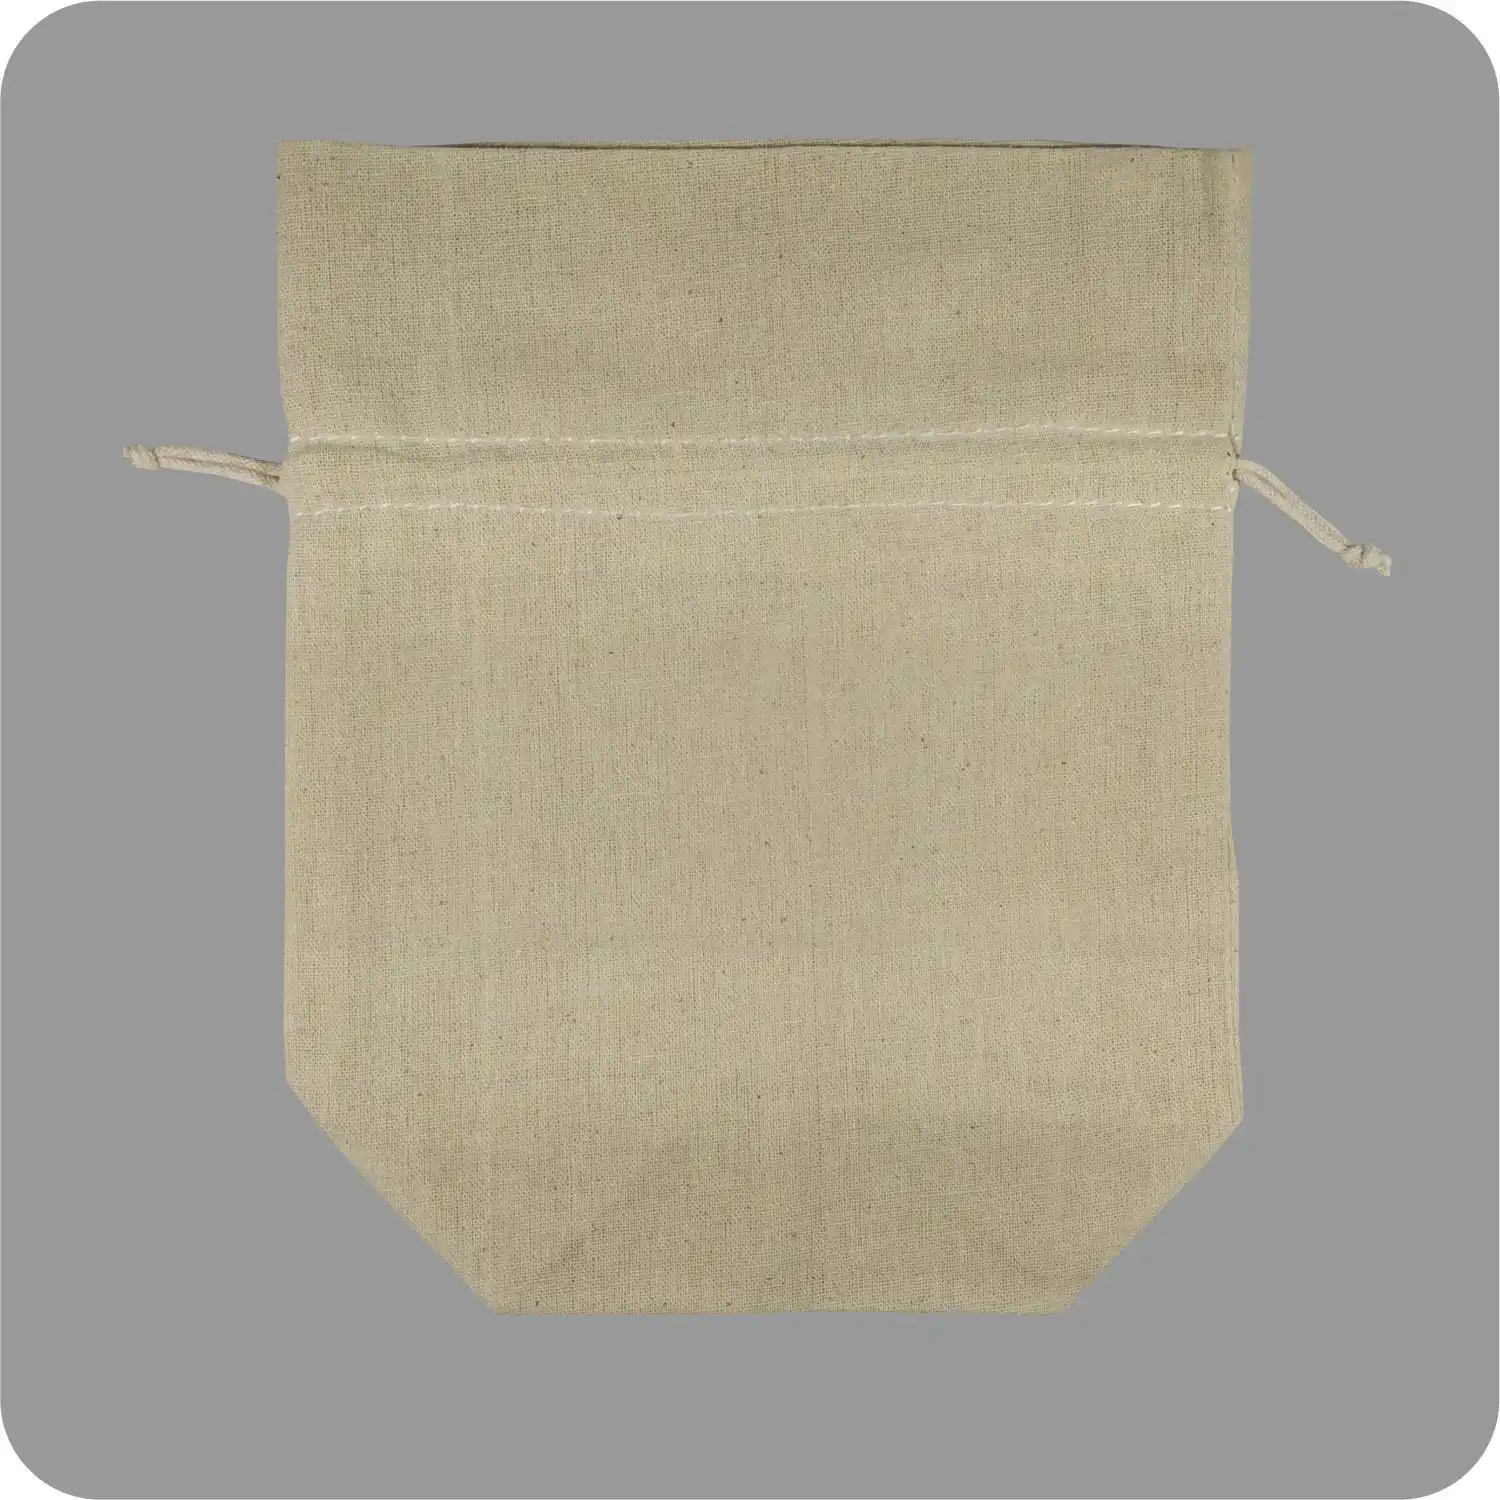 7x9x3 Inch 100% Cotton Double side Drawstring Pouch (Pack of 50)